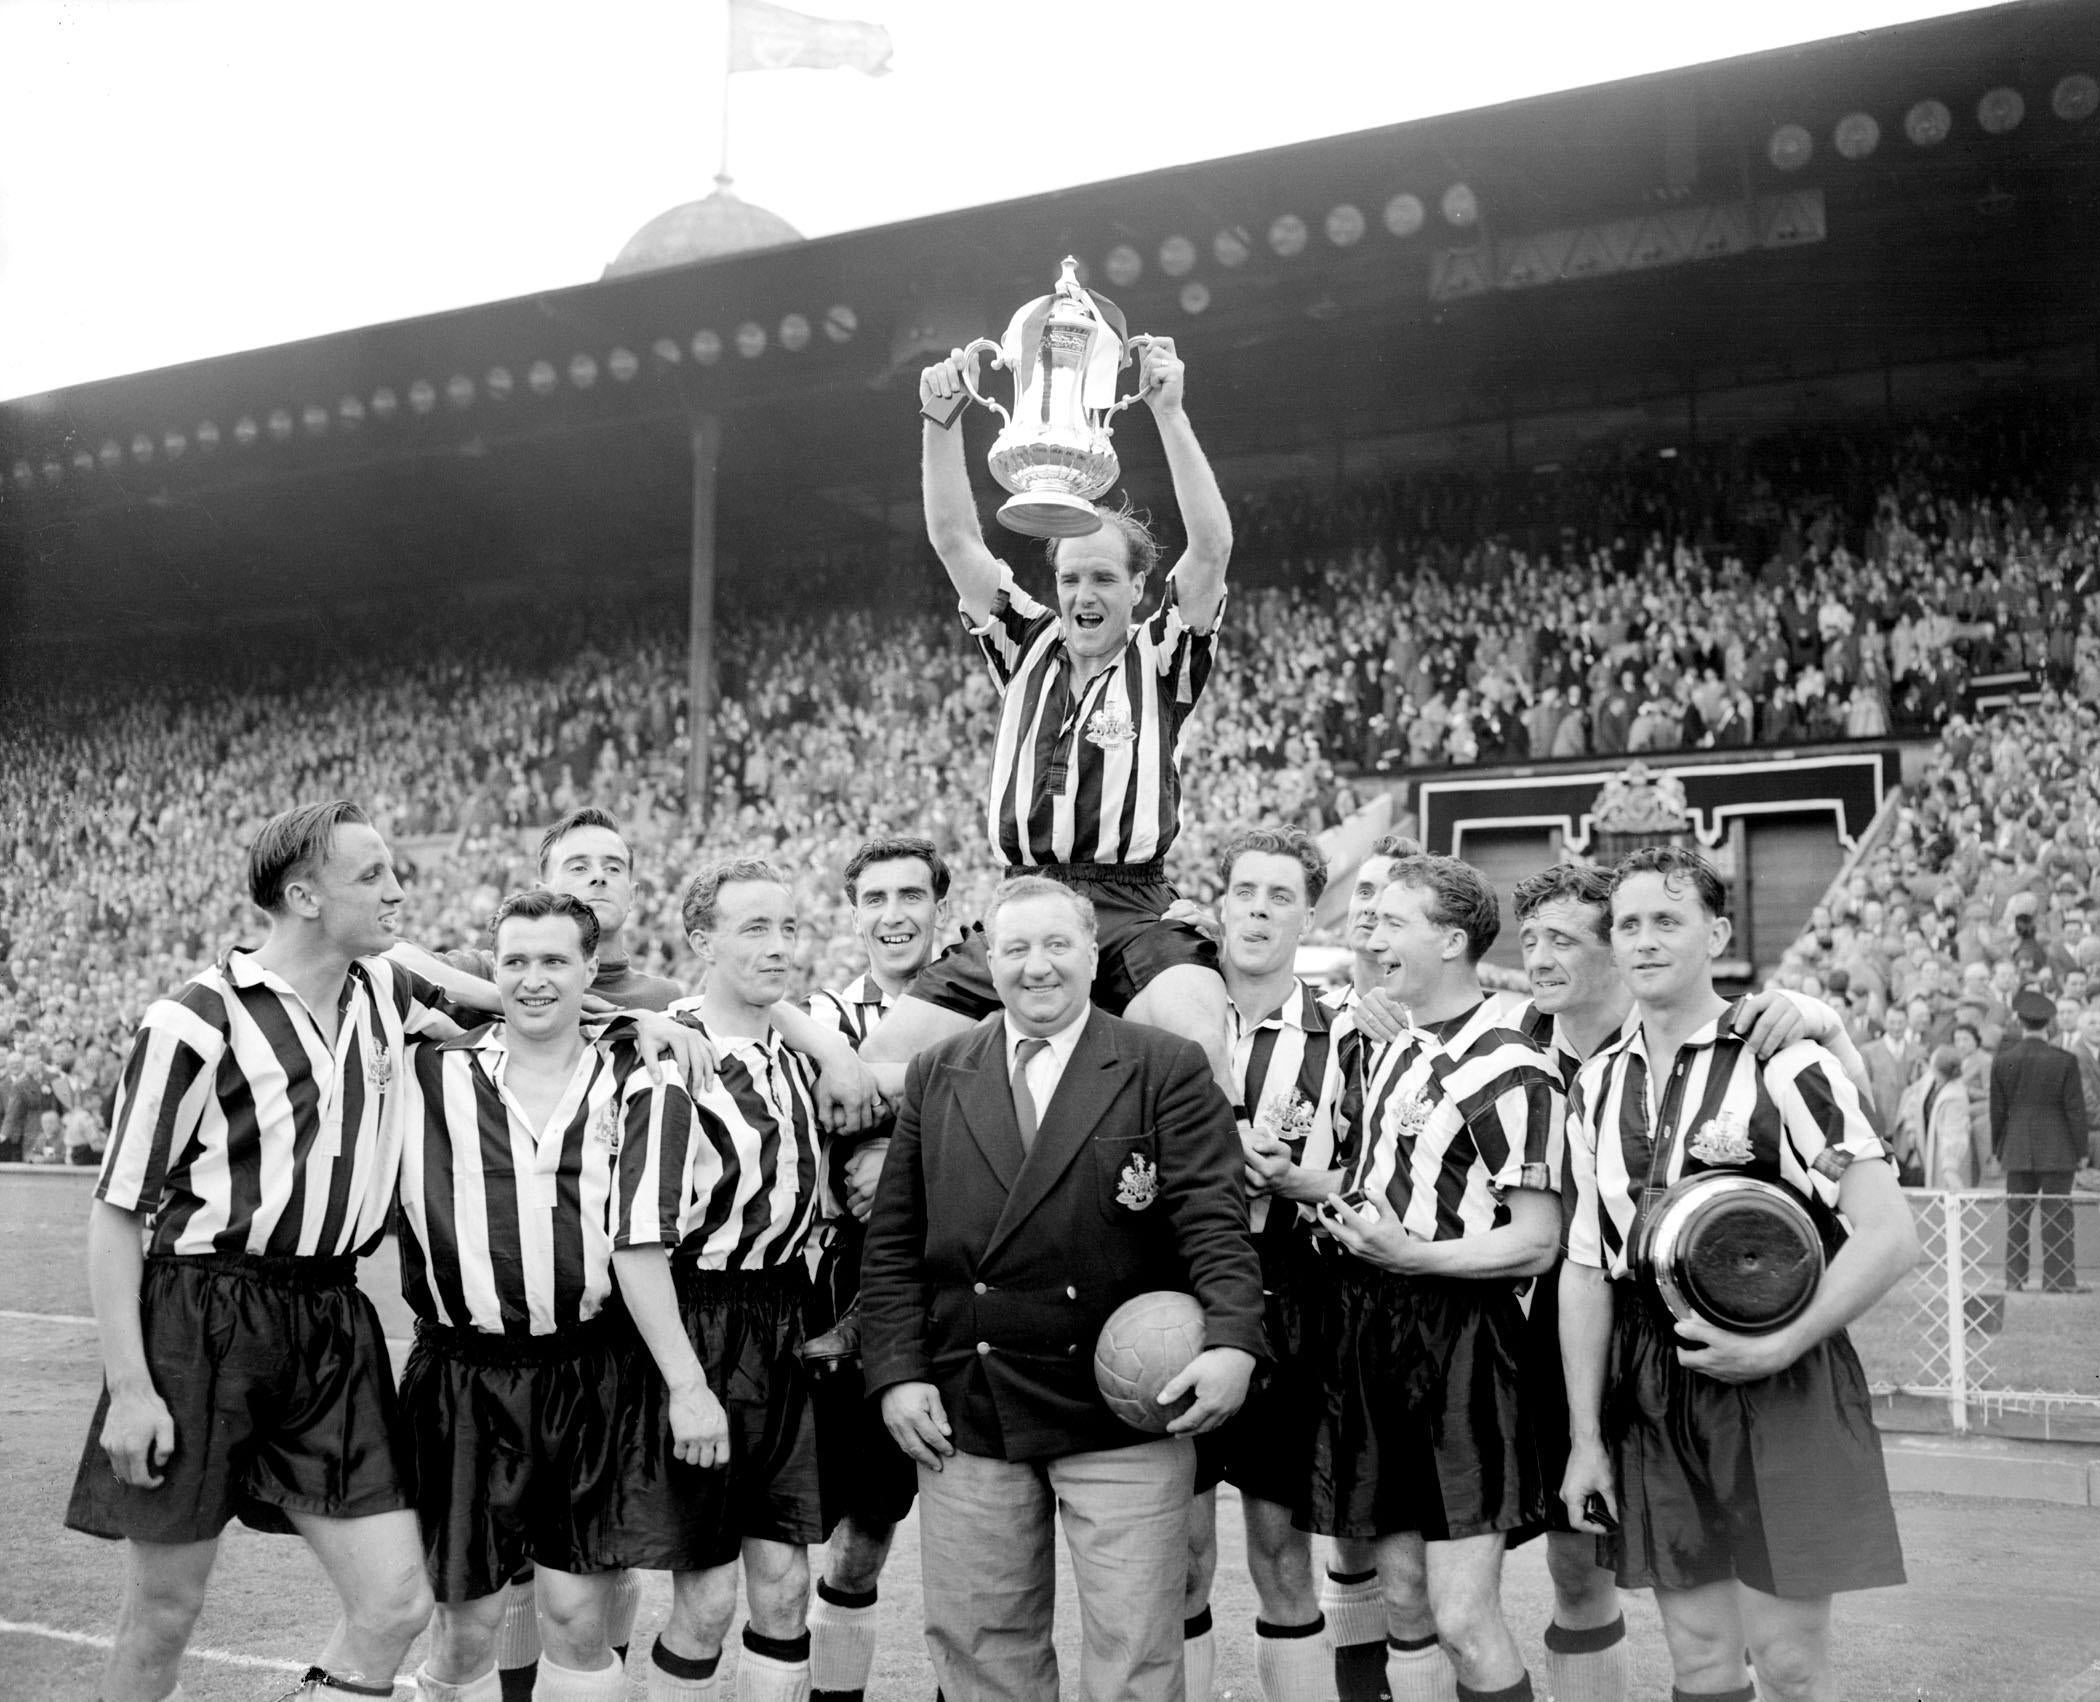 Newcastle captain Jimmy Scoular lifts the FA Cup aloft after a 3-1 victory over Manchester City in the 1955 final (PA)